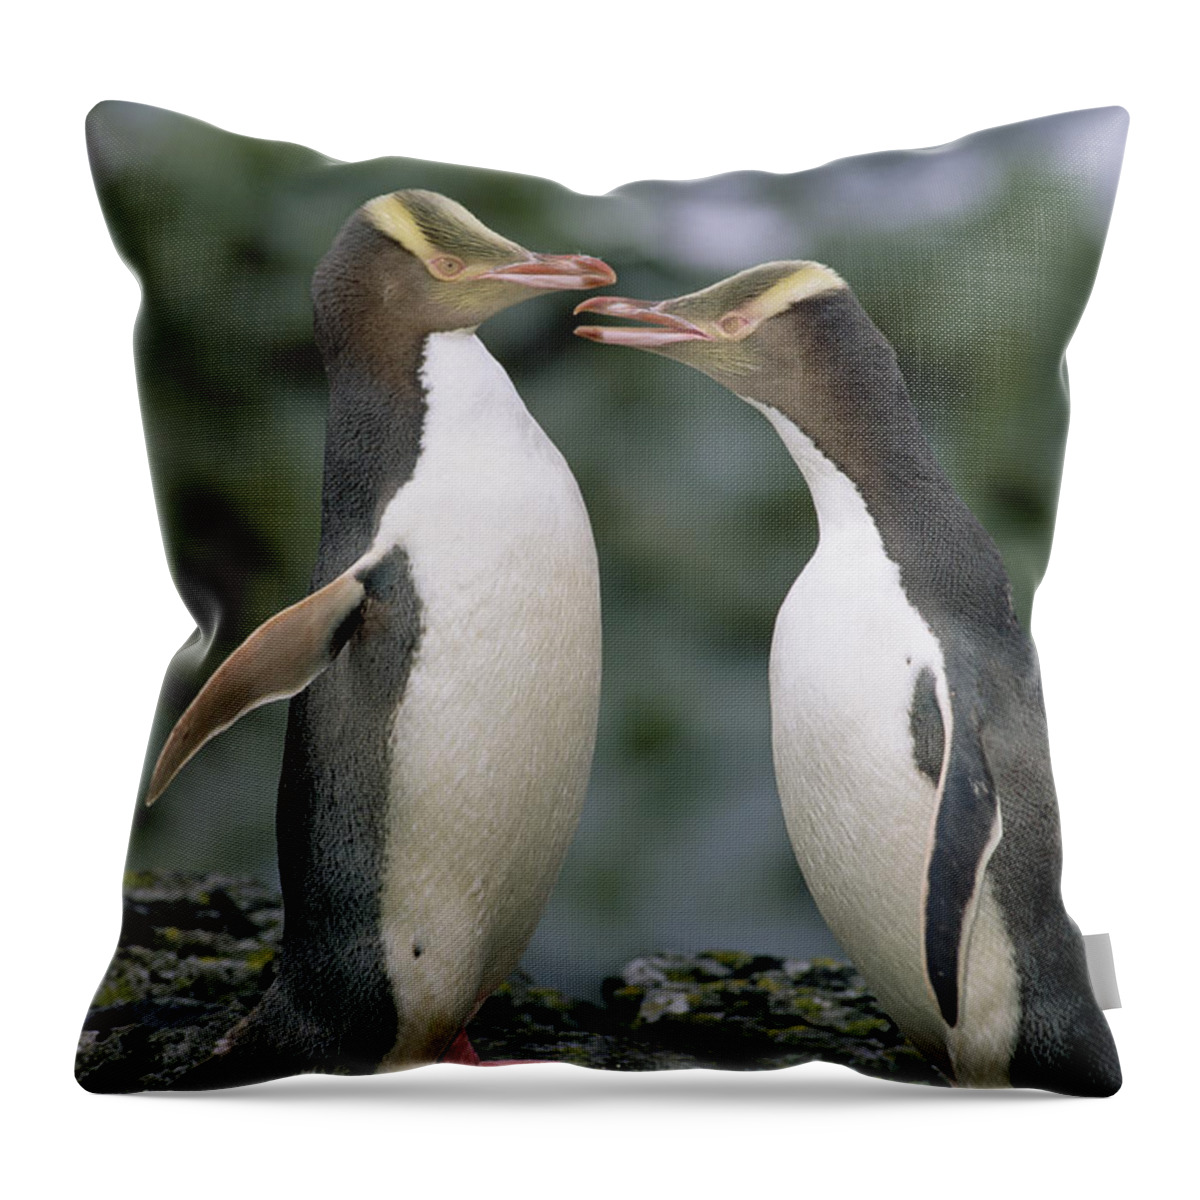 00193991 Throw Pillow featuring the photograph Yellow-eyed Penguins by Tui De Roy